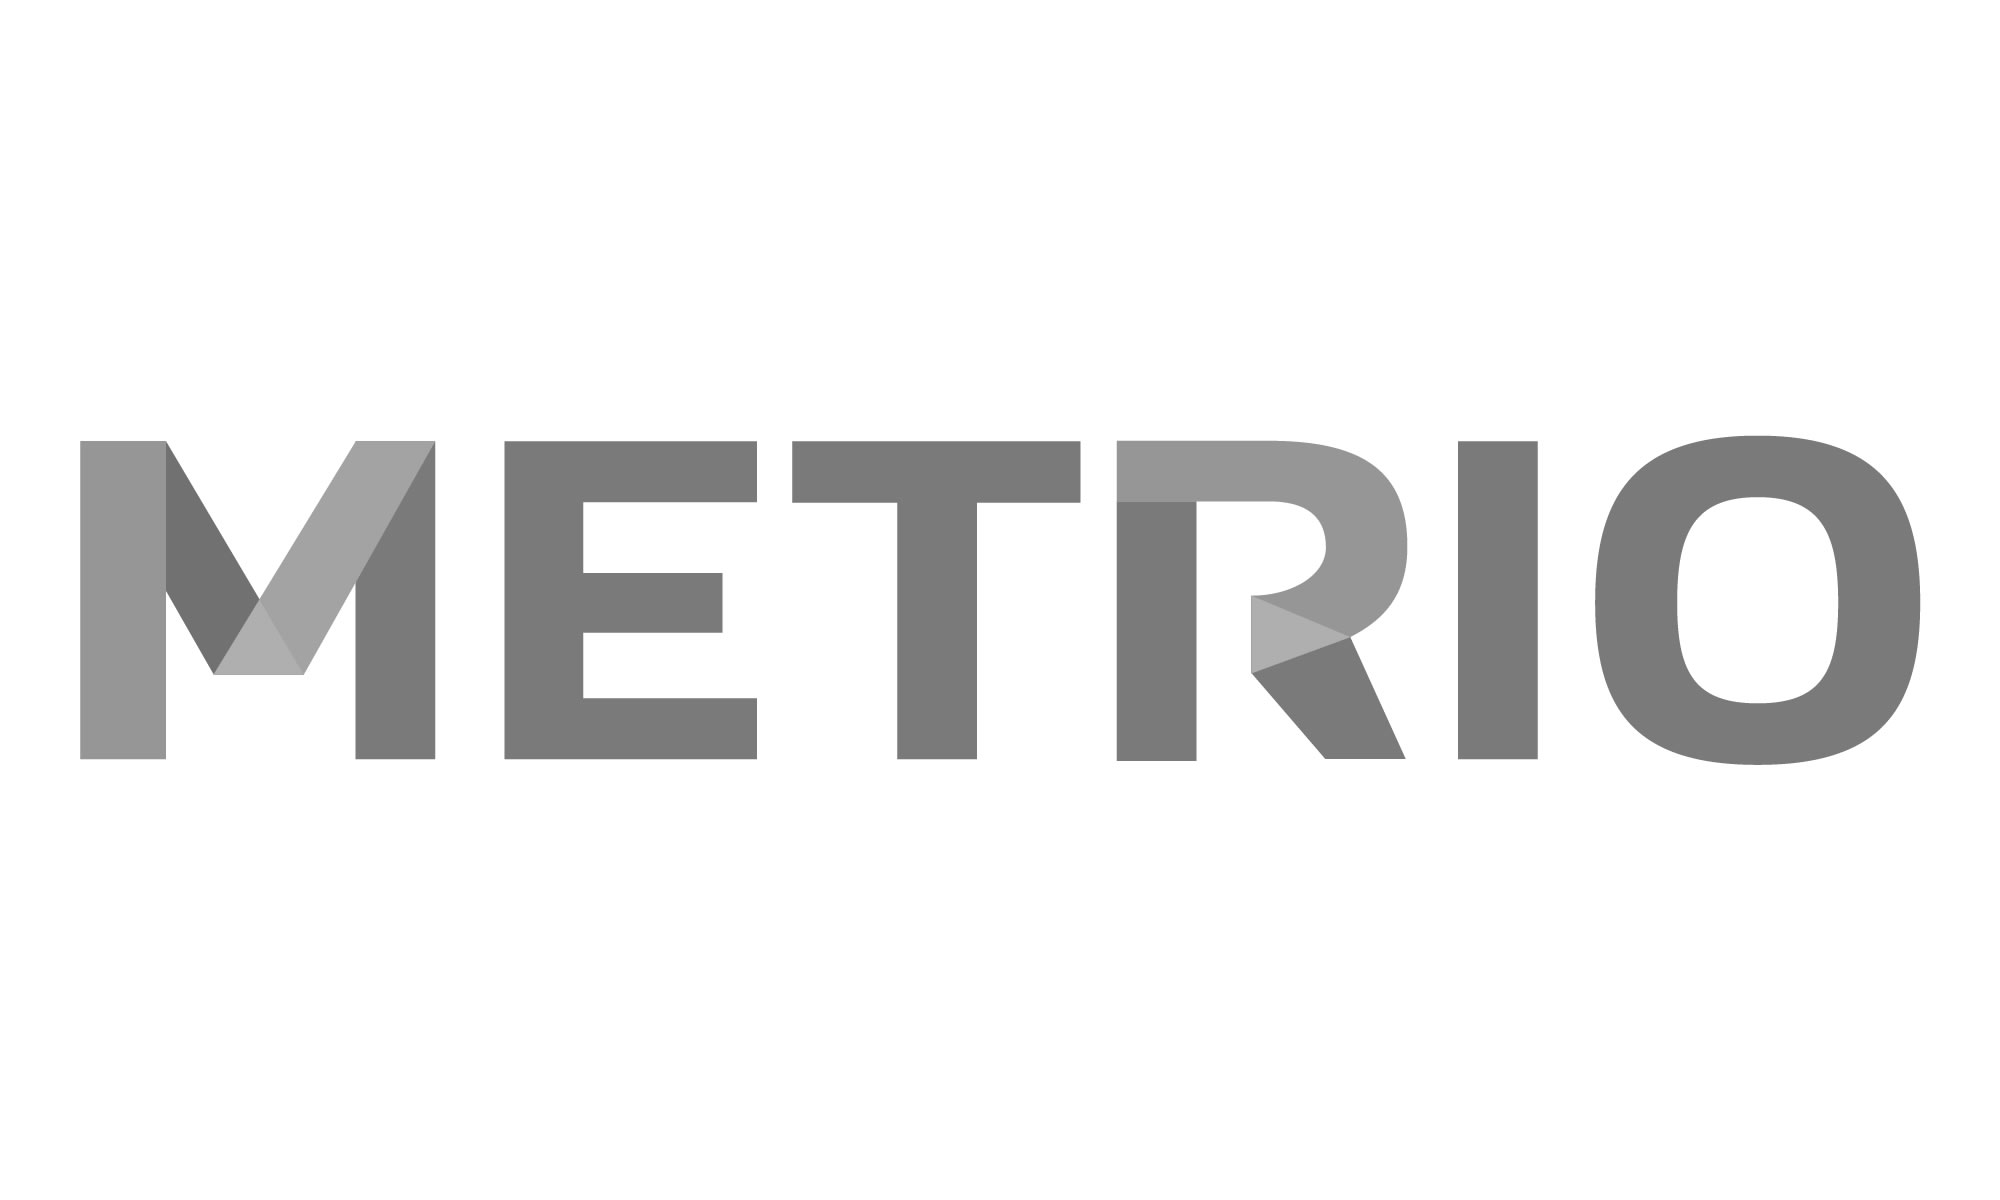 Metrio Software offers sustainability expertise and a web-based platform for all your CSR and extra-financial reporting needs